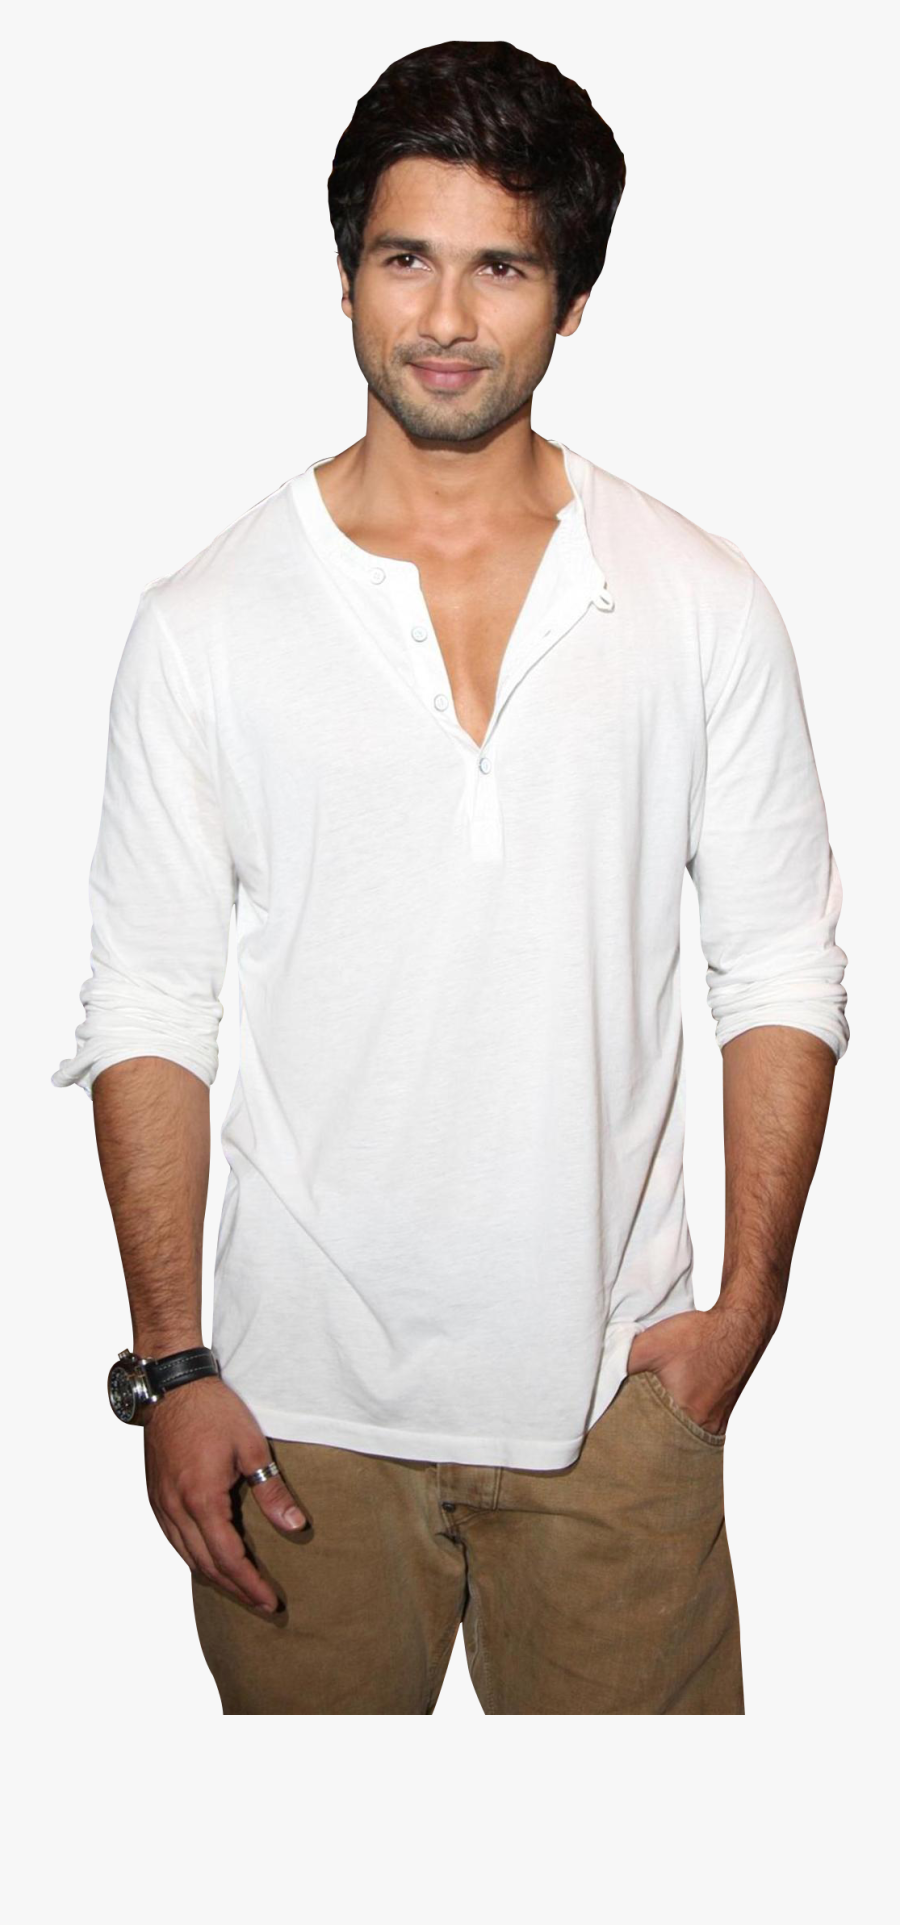 Celebrity Png Male Shahid - Shahid Kapoor Png, Transparent Clipart